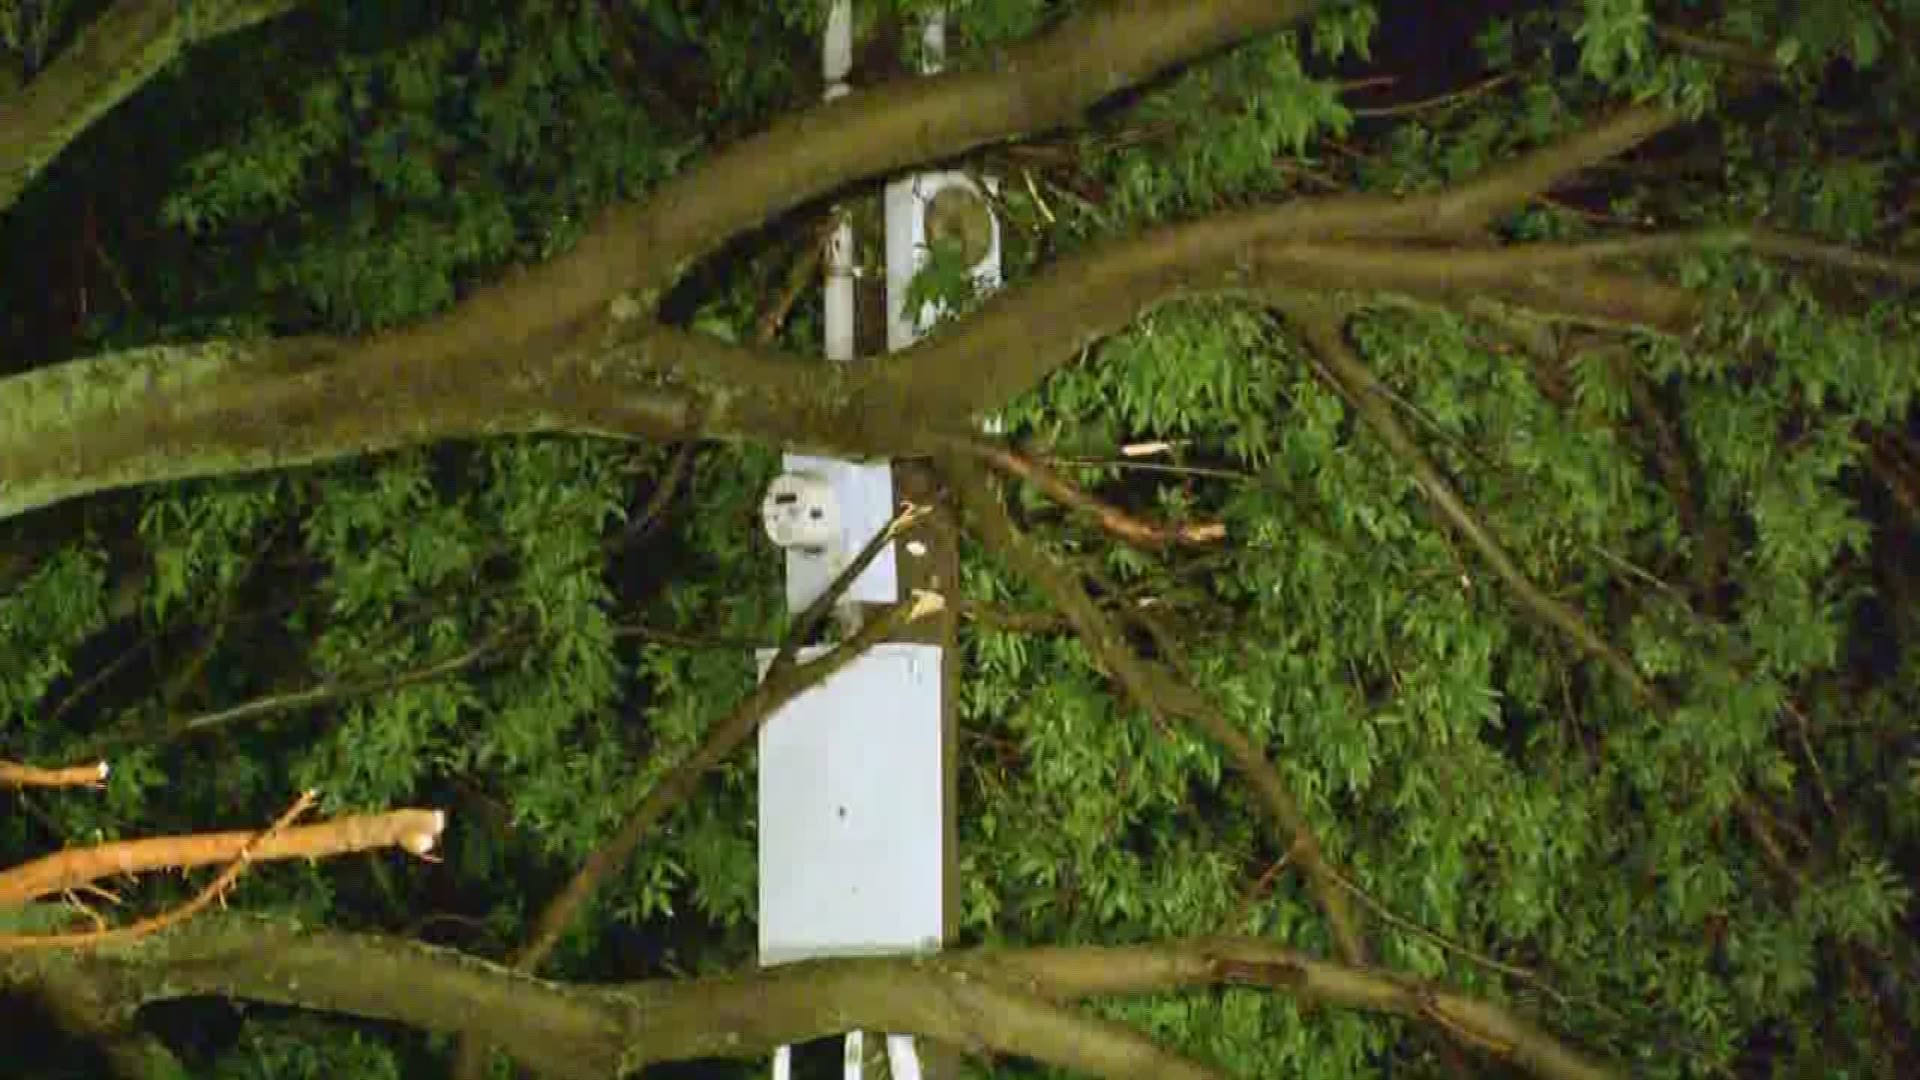 Oncor gives an update on how much power was lost in our overnight storm